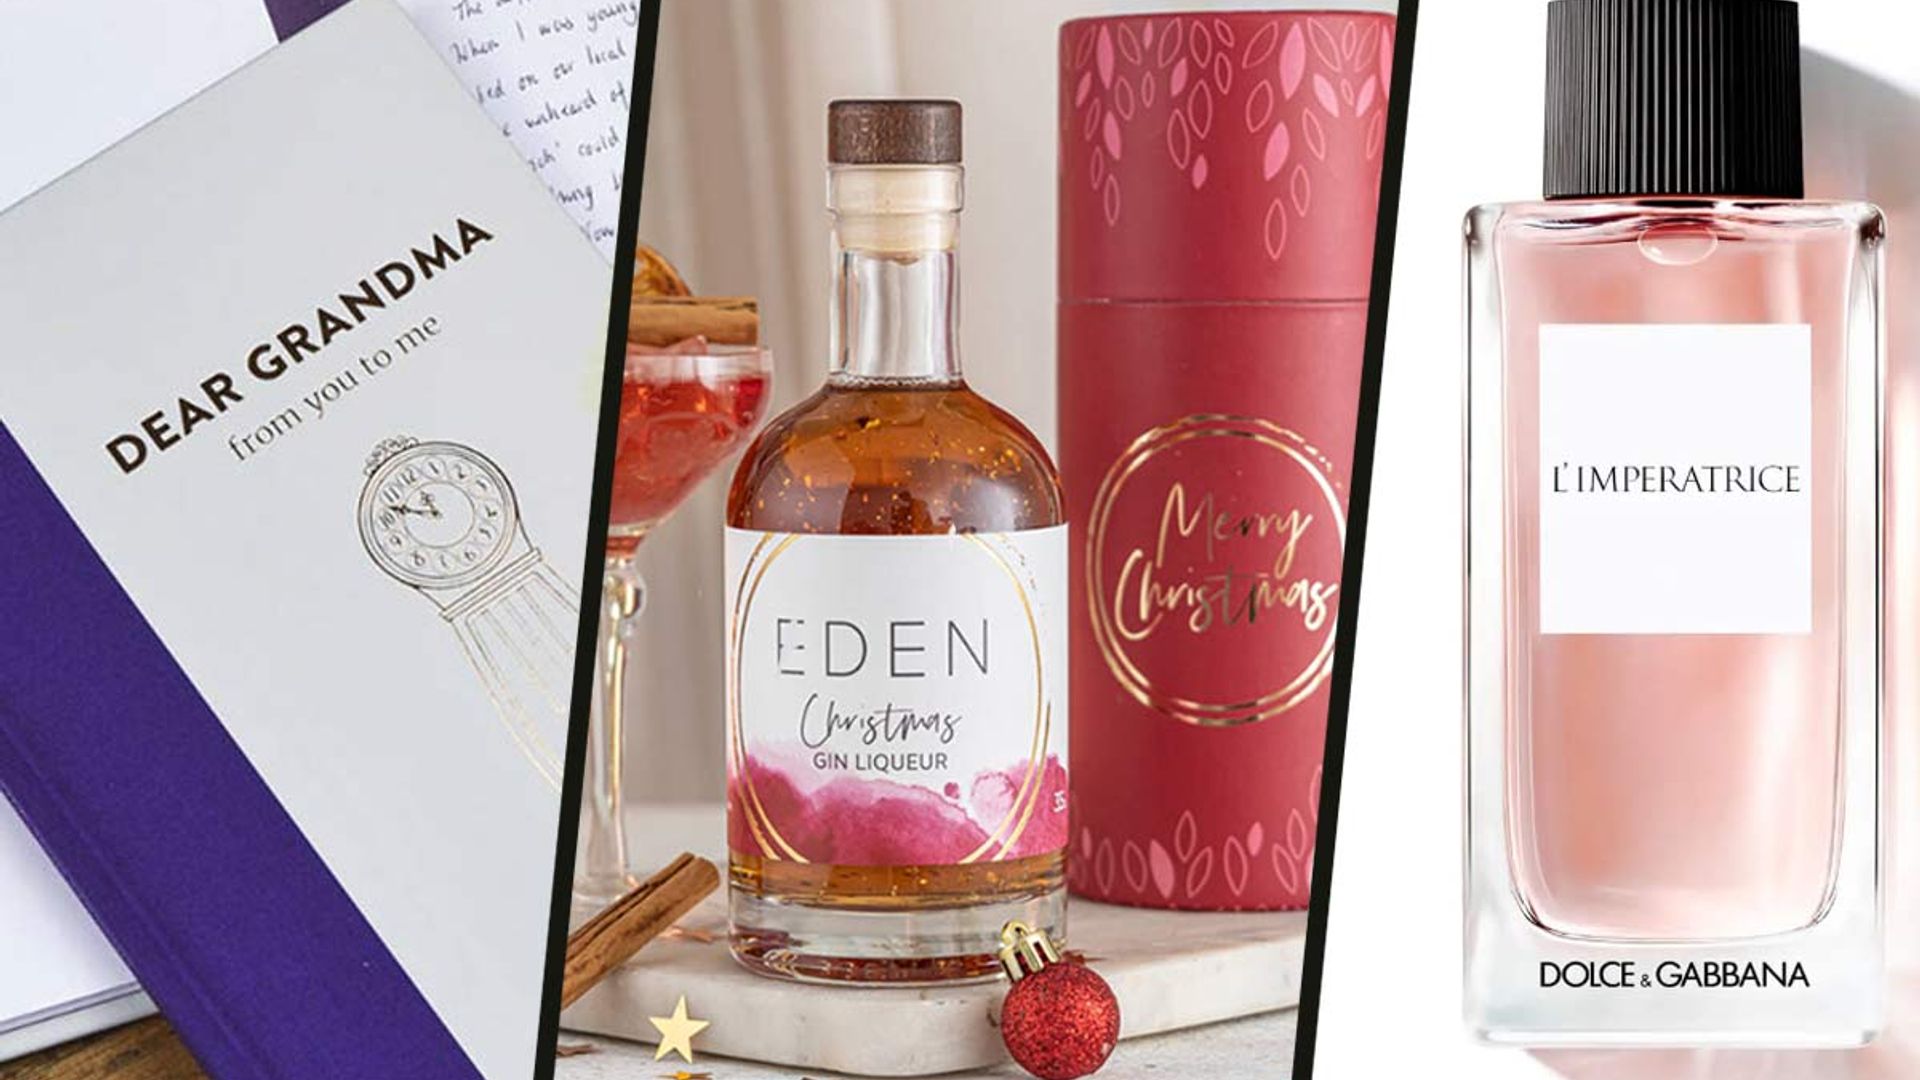 14 Christmas gifts for under £30 to treat the whole family for less